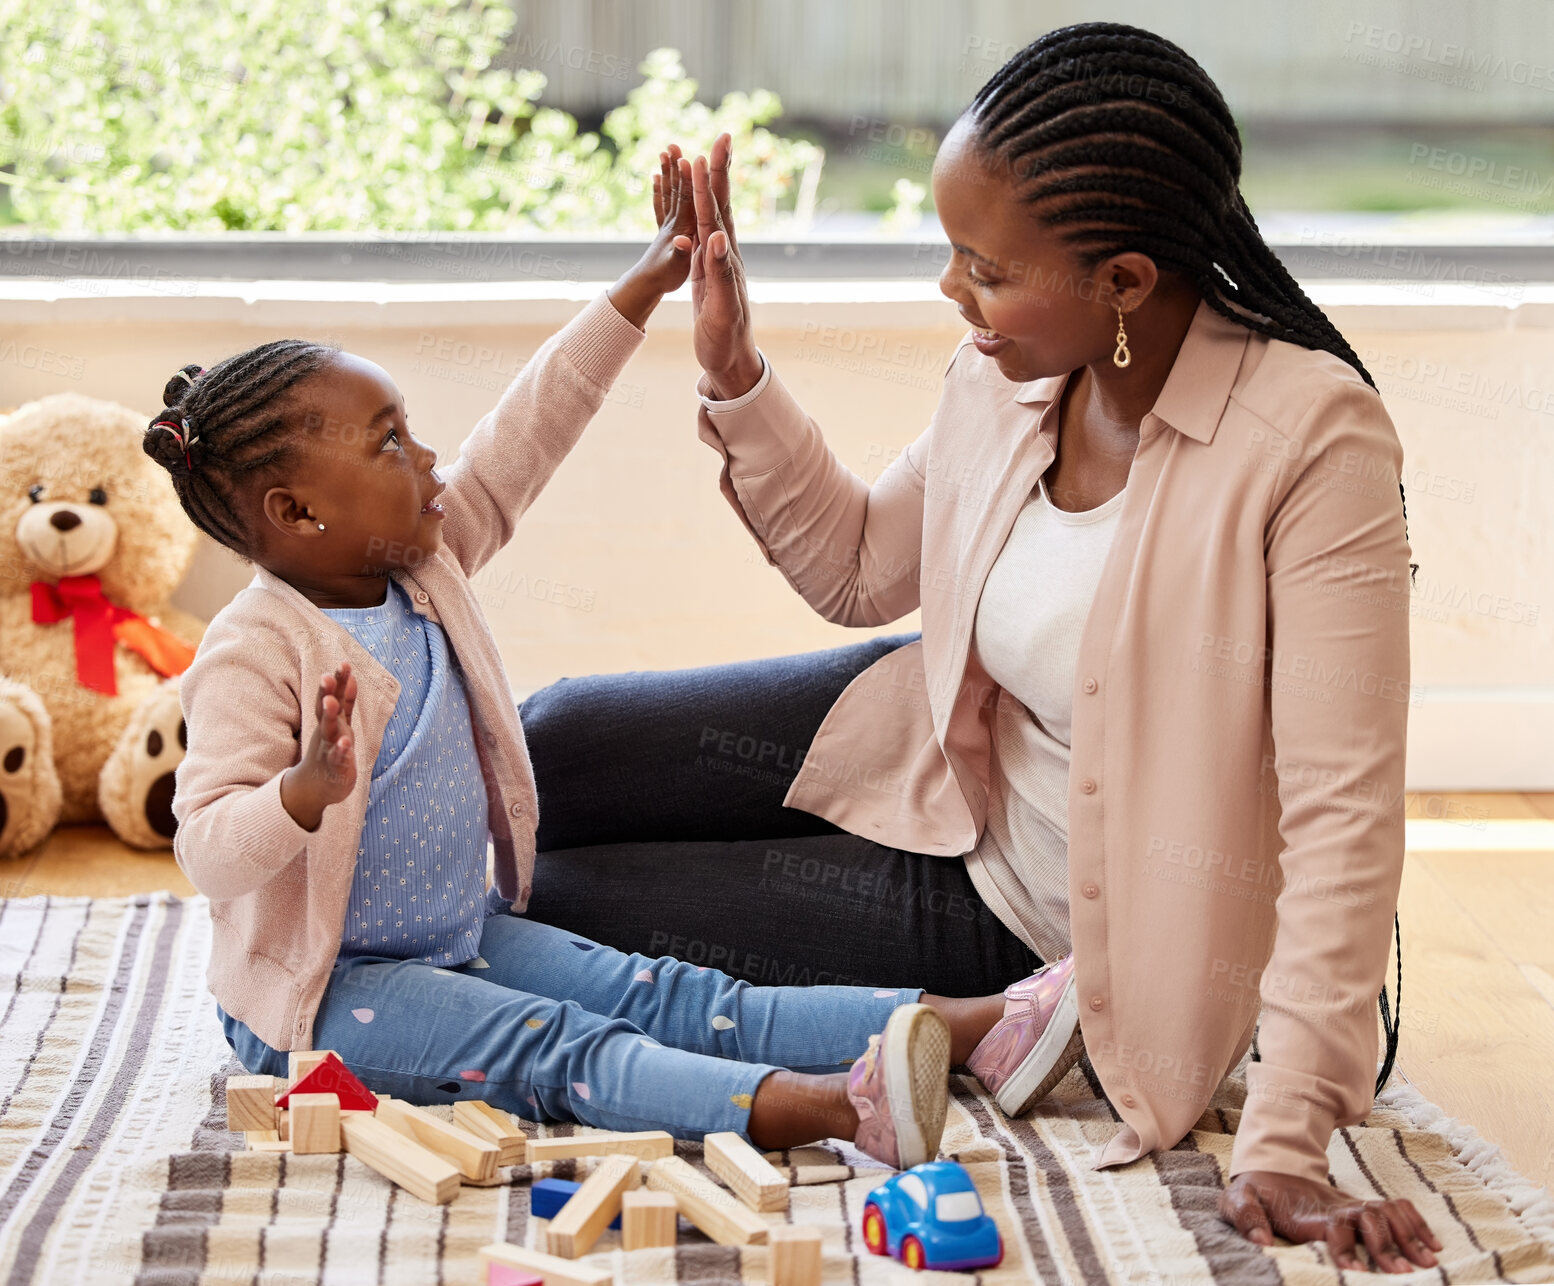 Buy stock photo Shot of a little girl giving her mother a high five while playing at home